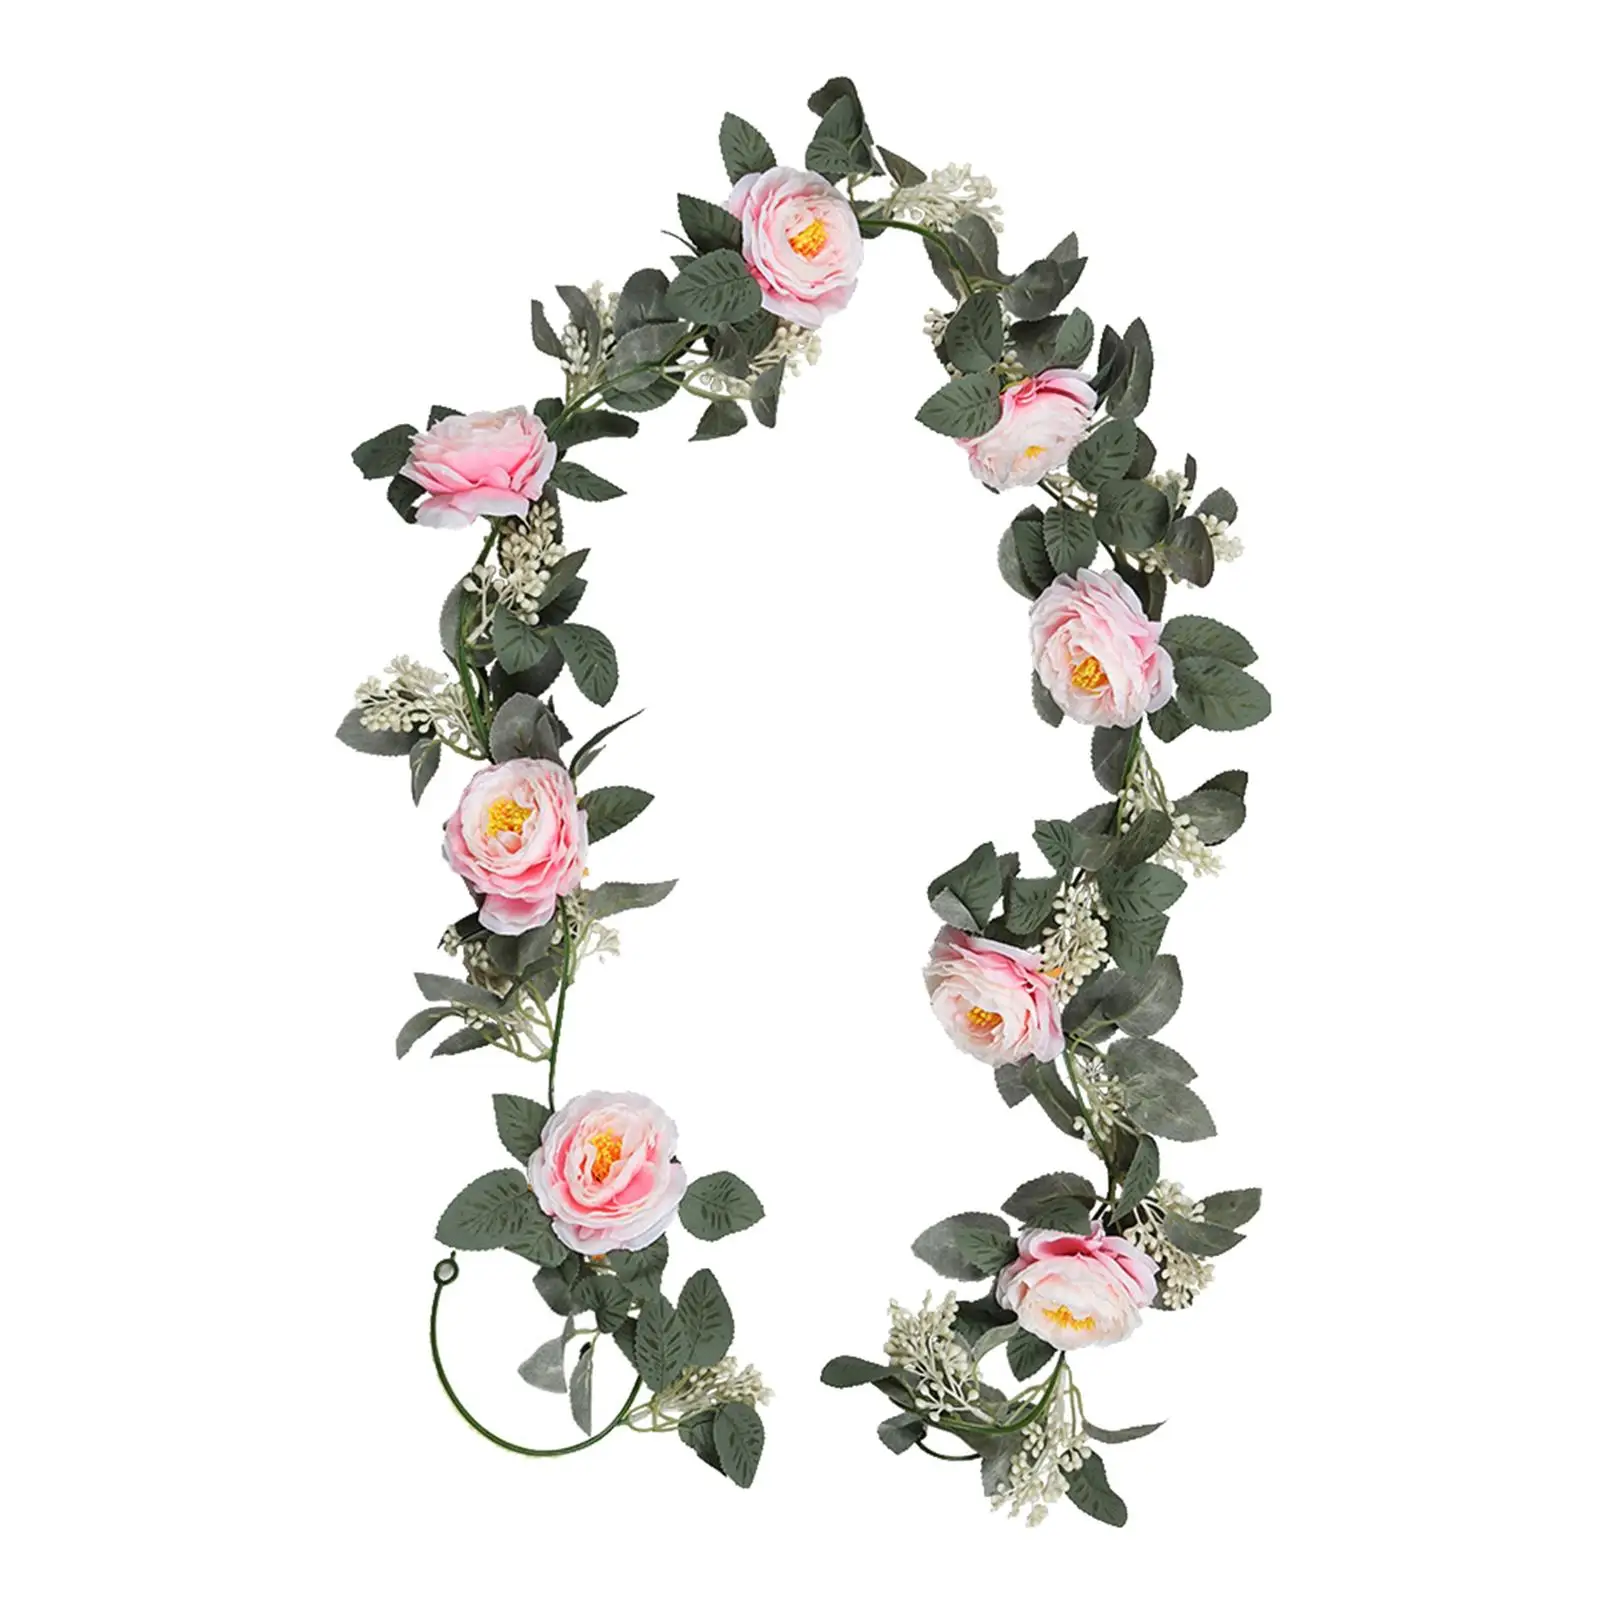 Artificial Camellias Flowers Vines Hanging Greenery Vines Wall Hanging Flower for Home Wall Ceremony Party